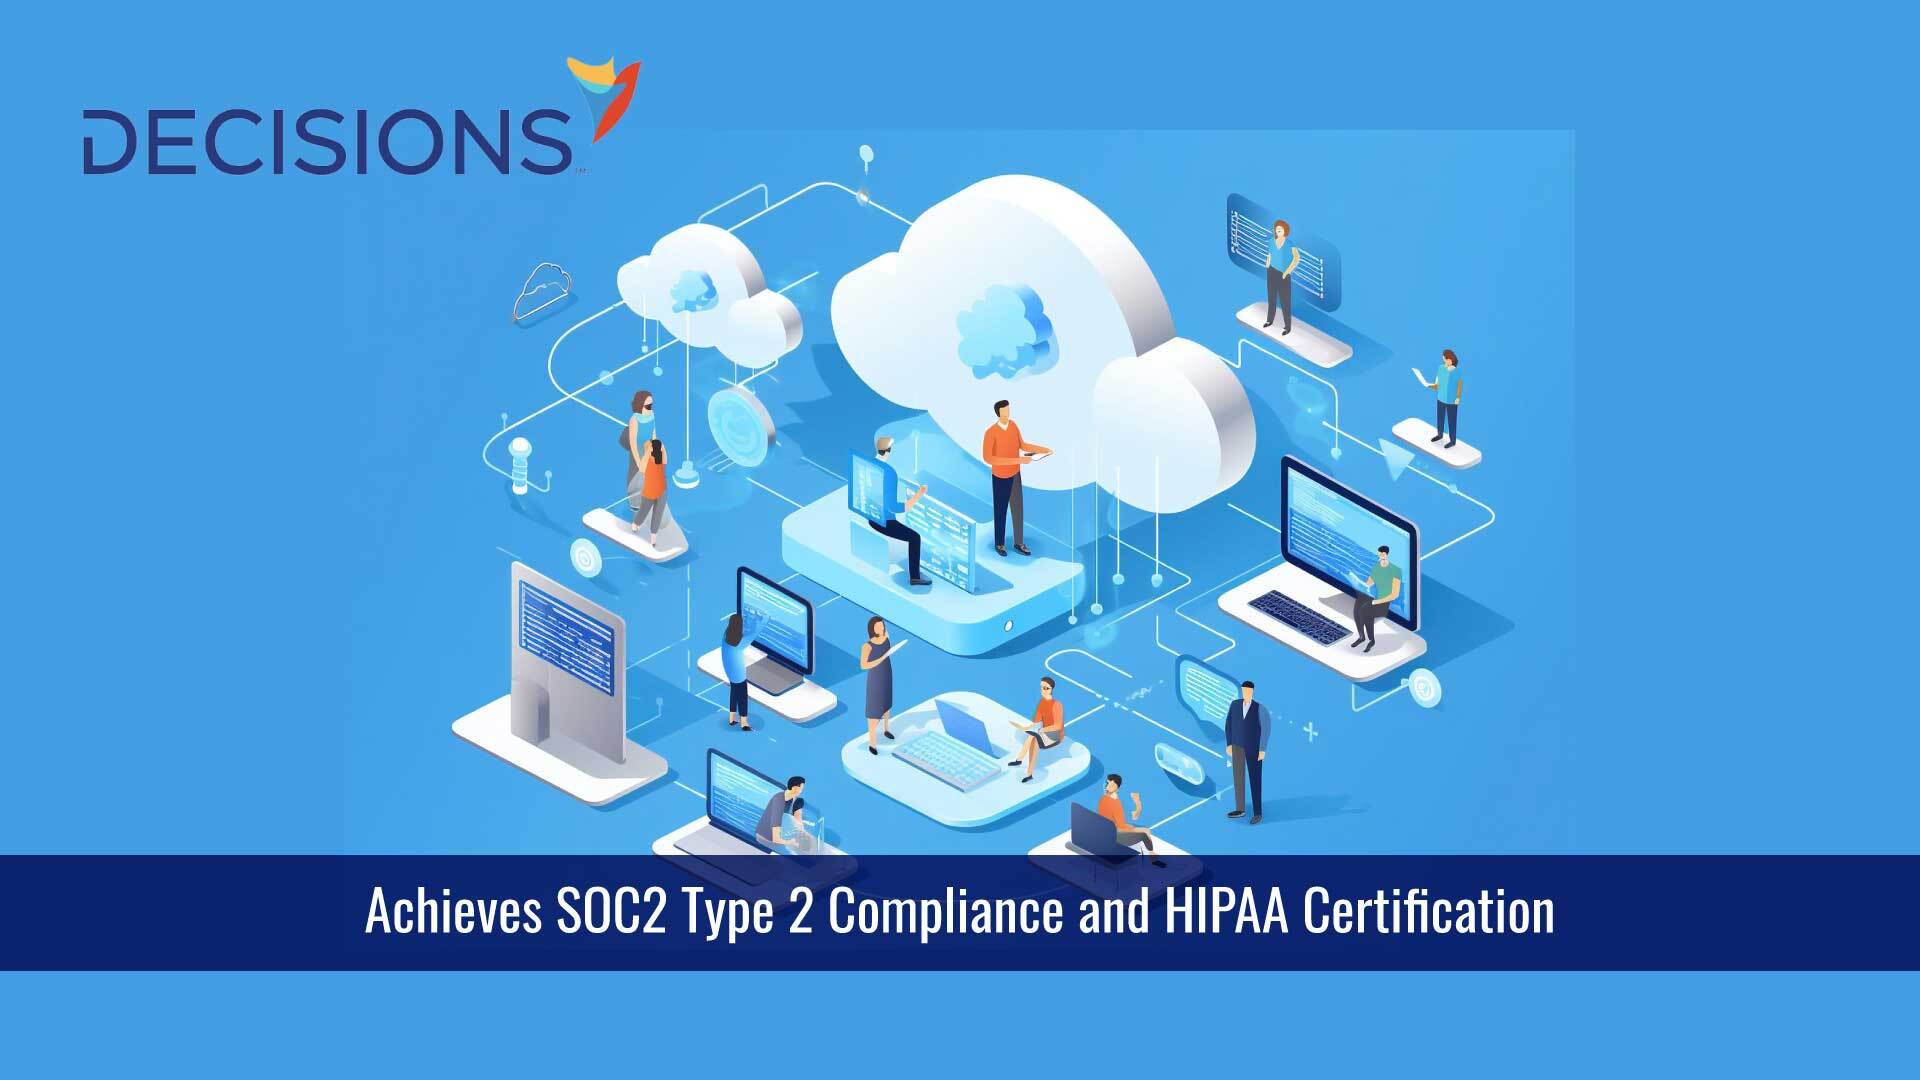 Decisions Achieves SOC2 Type 2 Compliance and HIPAA Certification, Reinforcing Commitment to Data Security and Privacy